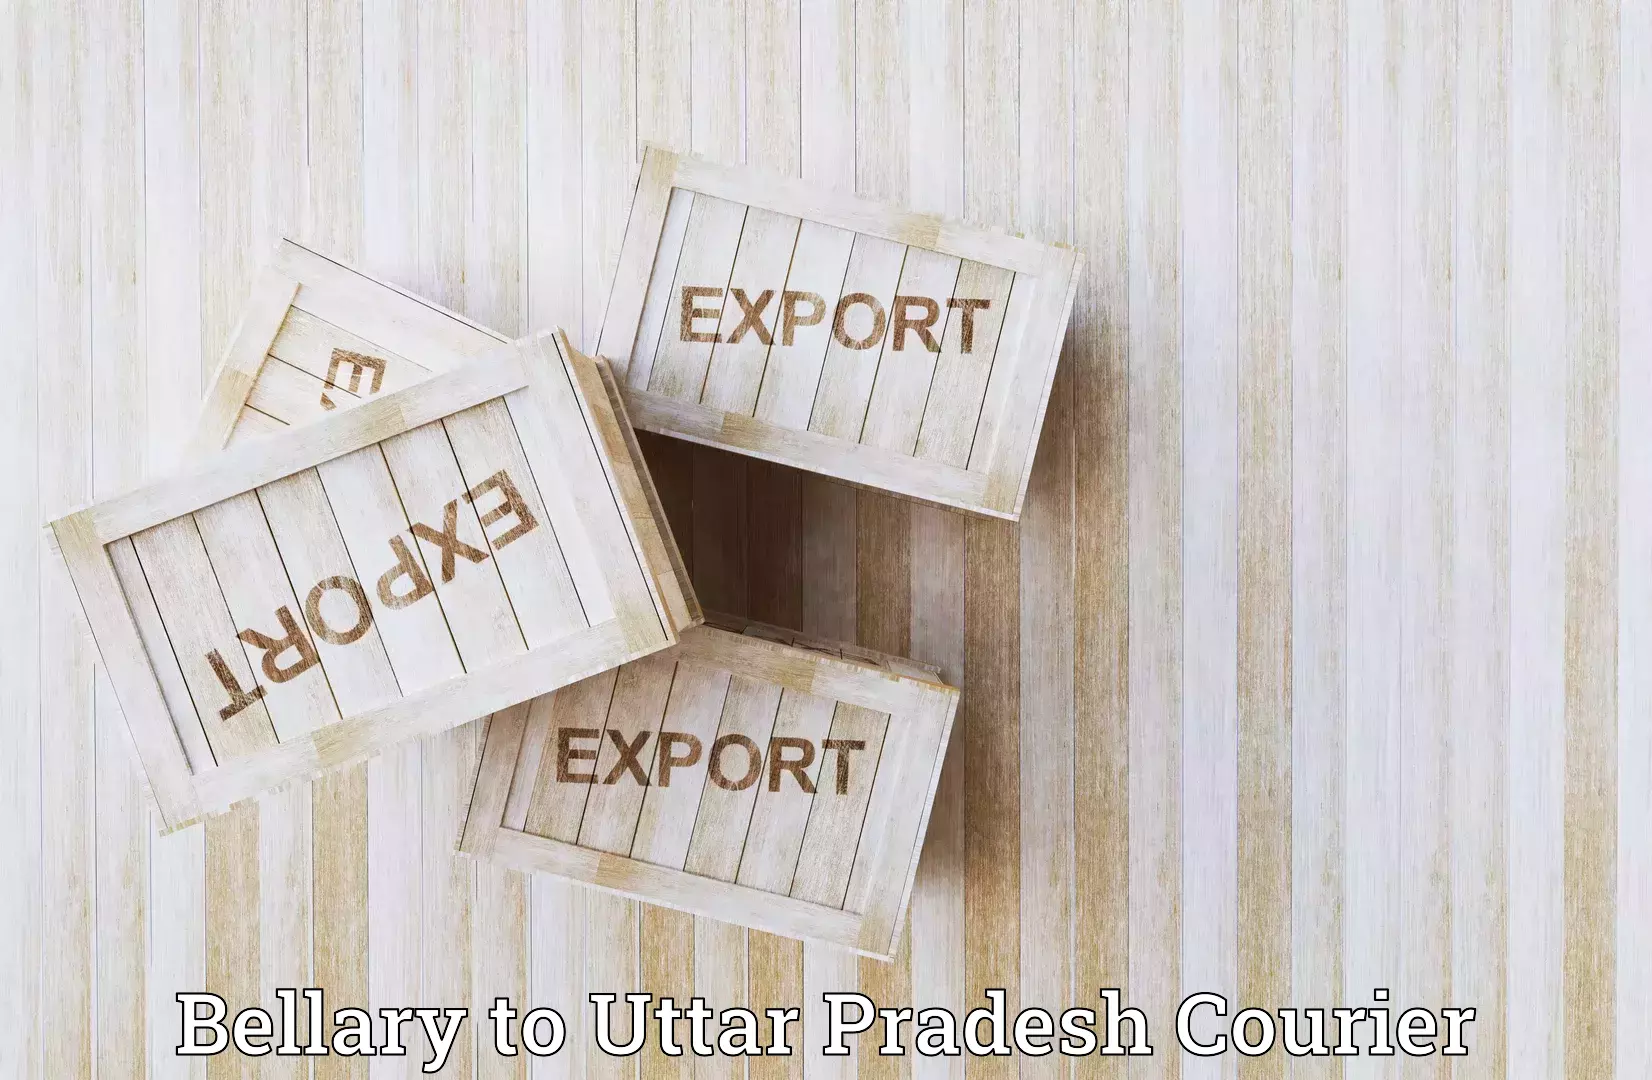 State-of-the-art courier technology Bellary to Lalitpur